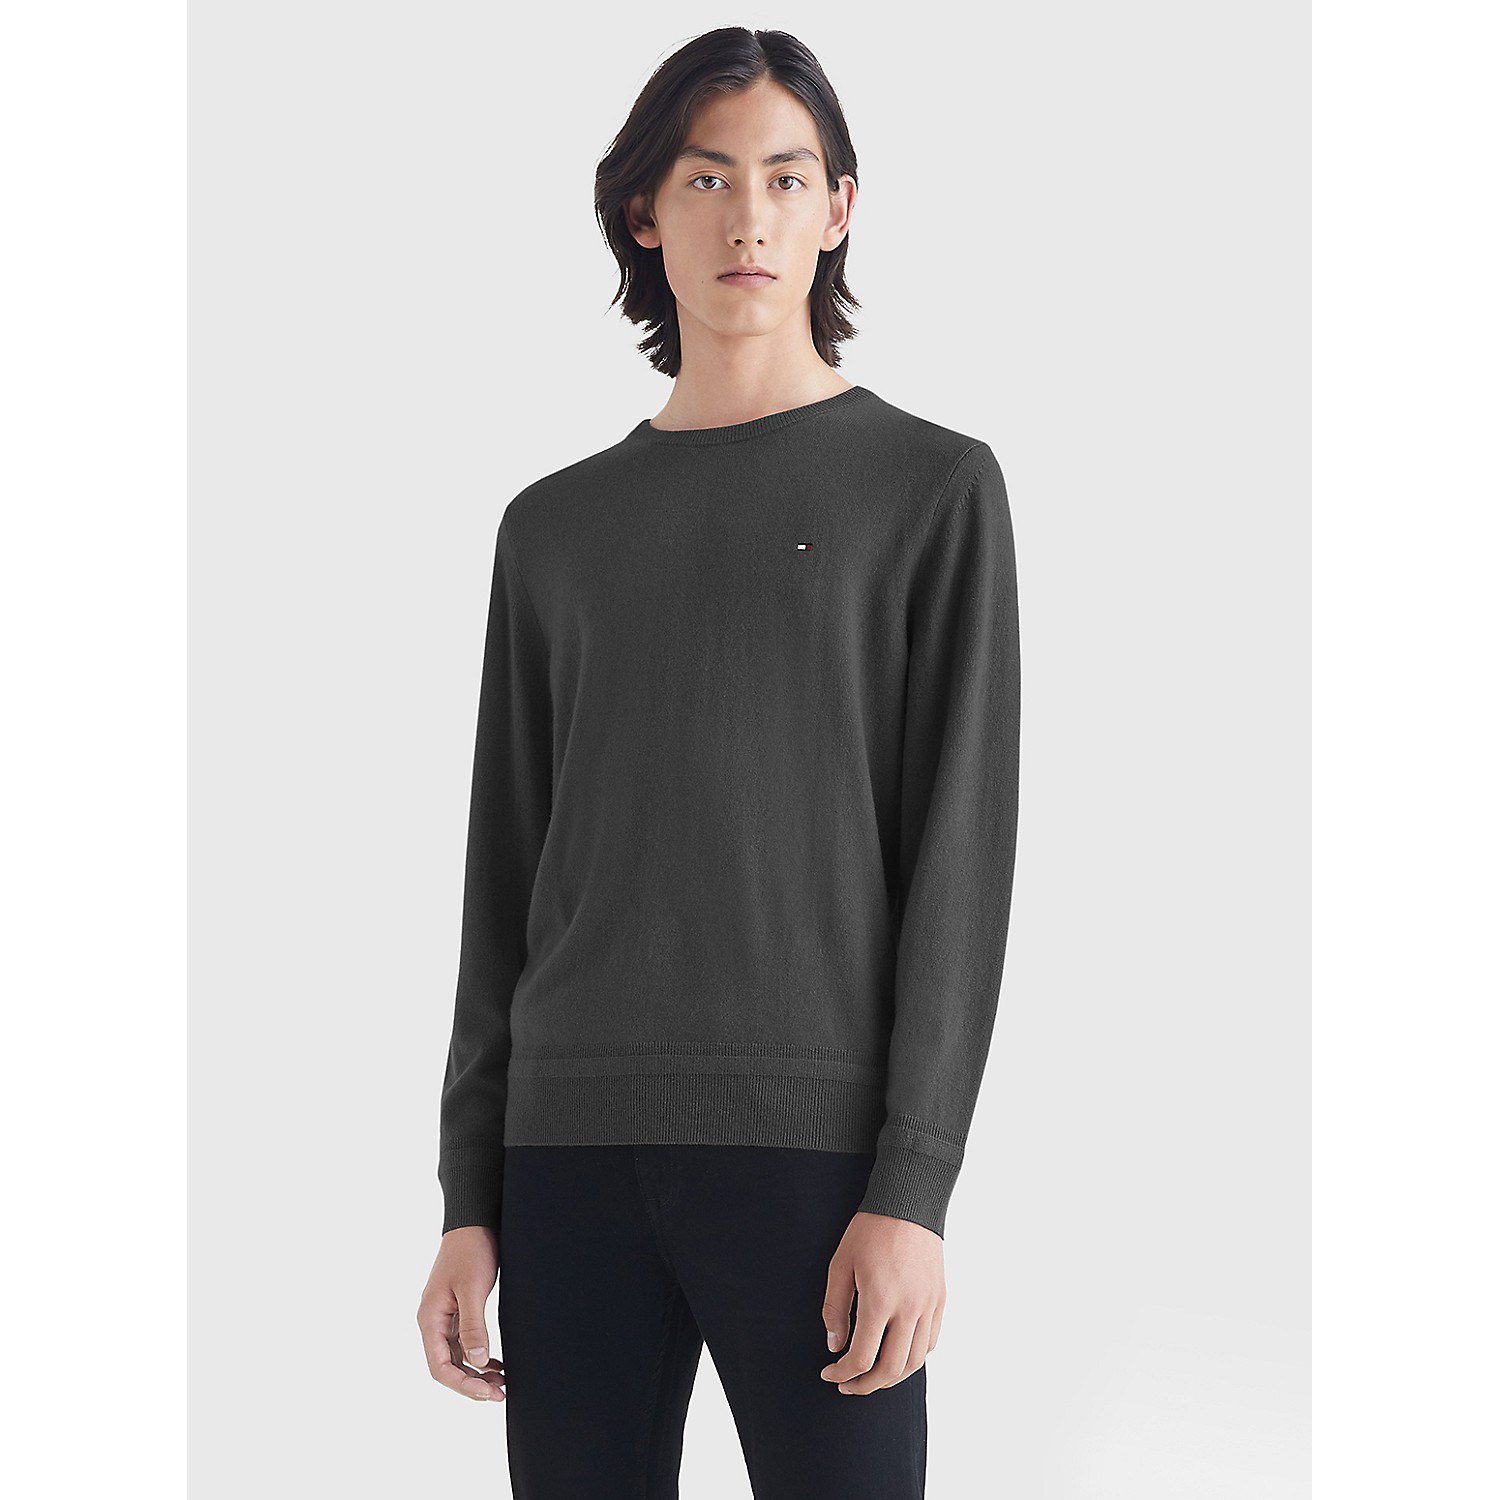 TOMMY HILFIGER Recycled Cashmere Crewneck Sweater